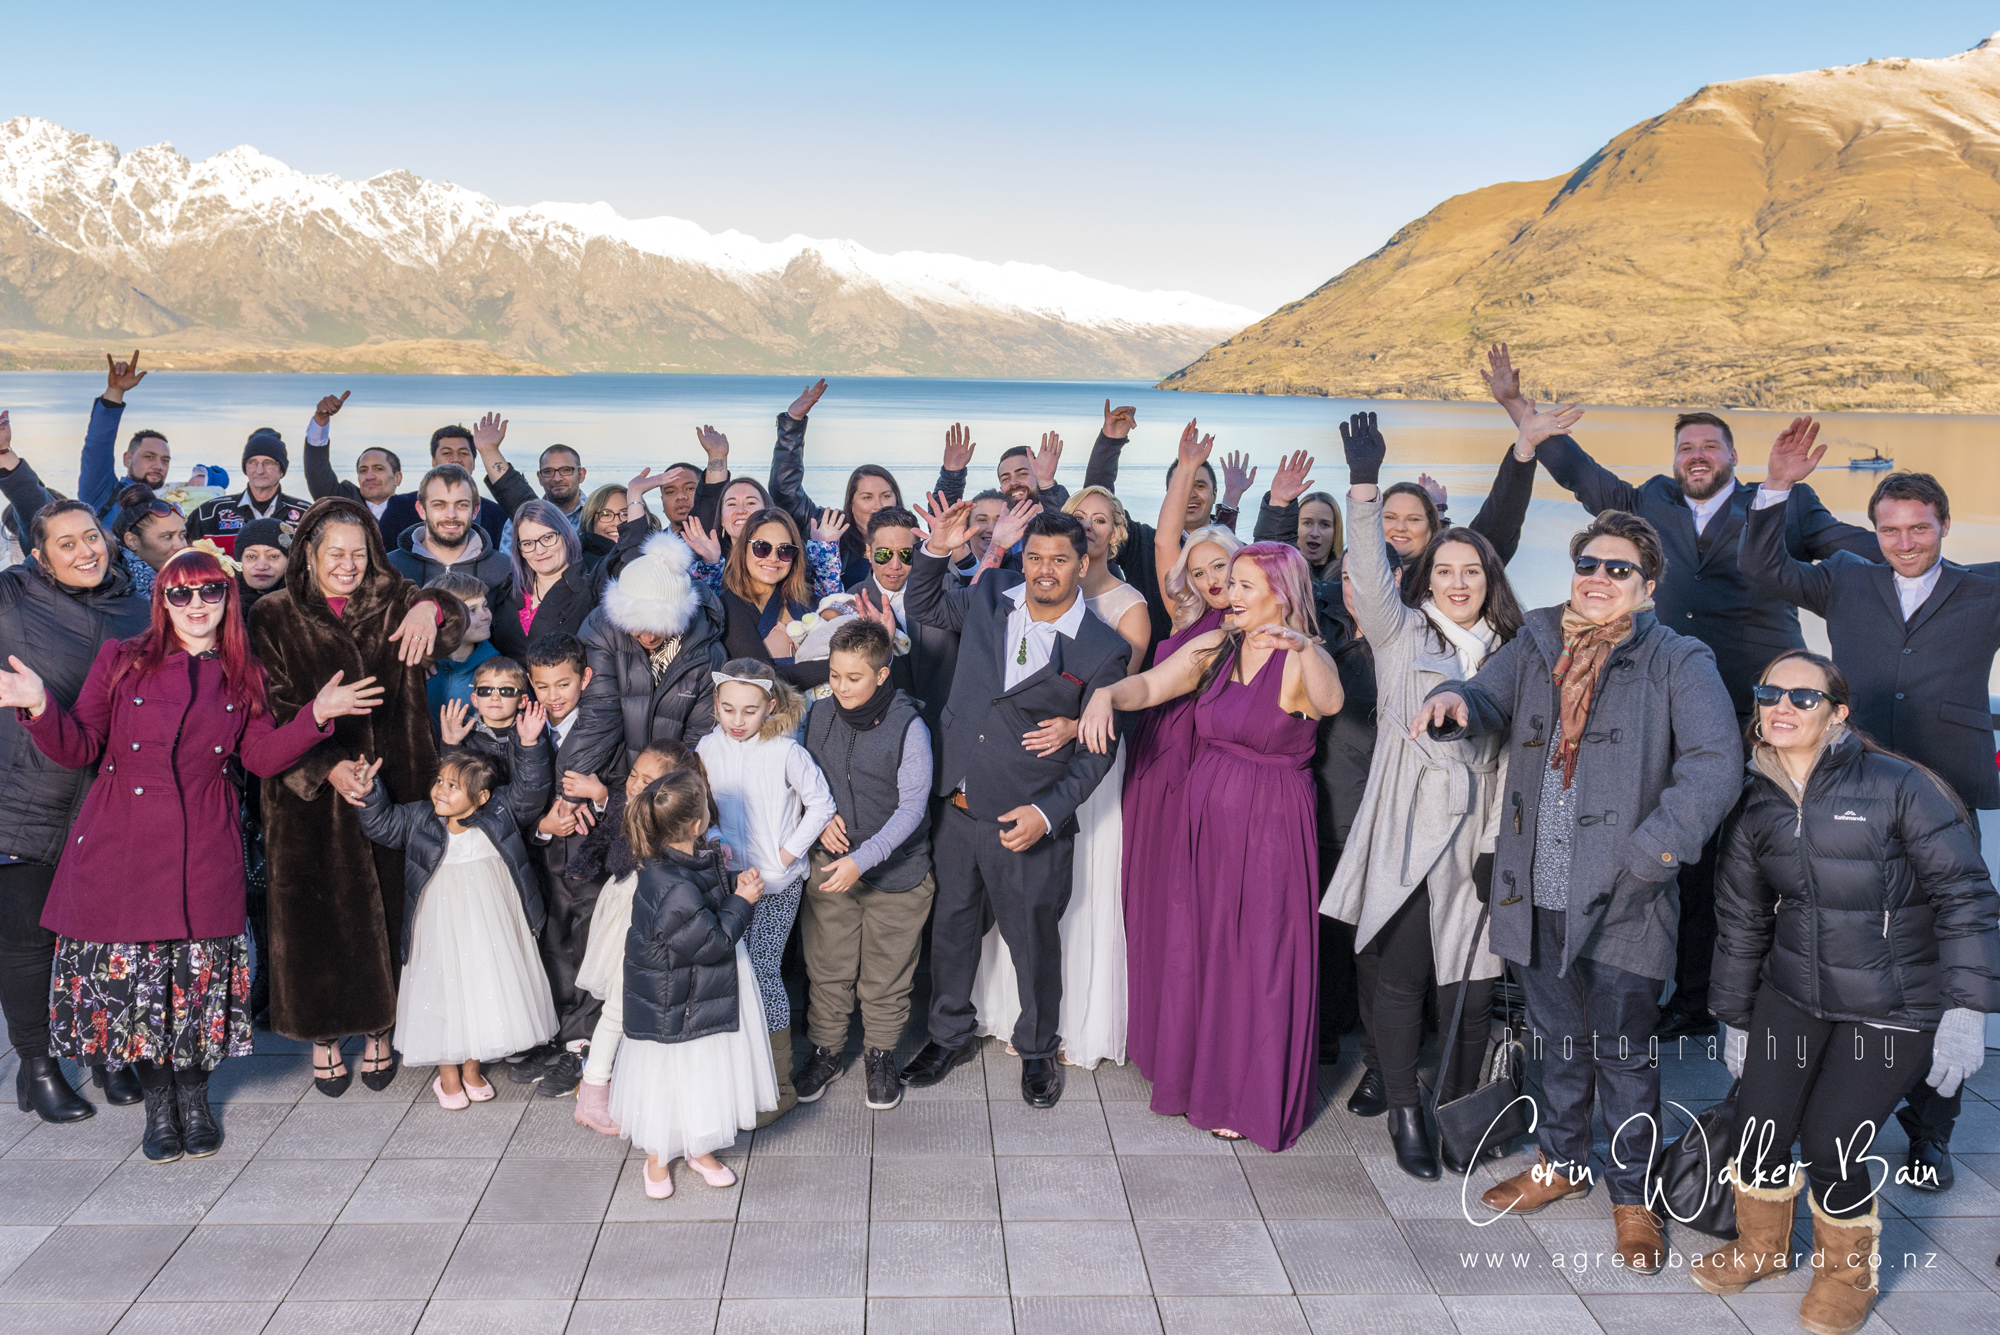 Everyone together, Jah and Teri's Queenstown wedding by New Zealand wedding photographer Corin Walker Bain of a great backyard